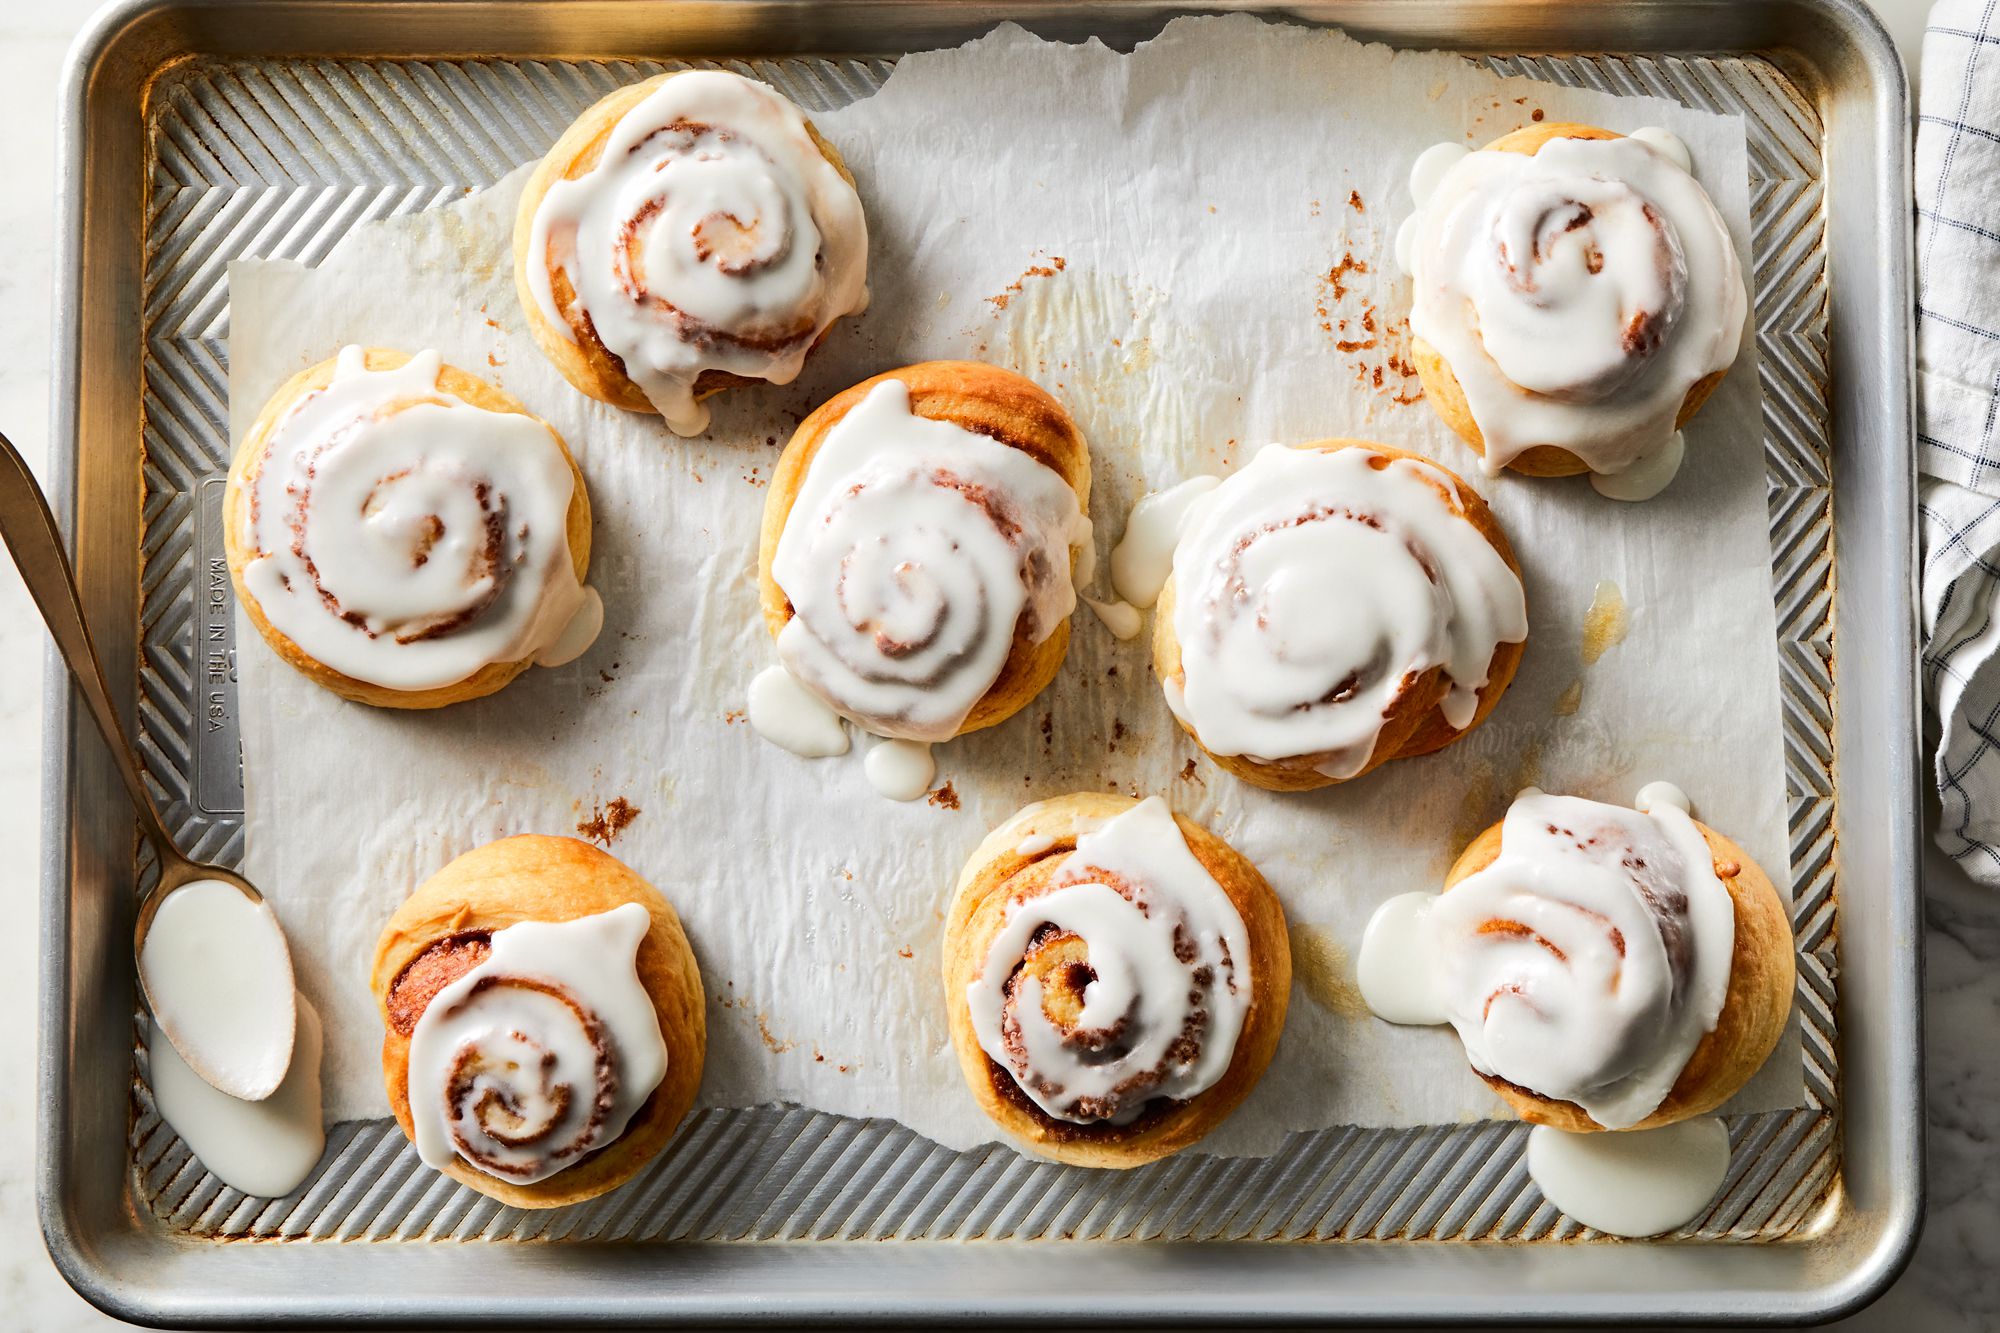 How to Make Cinnamon Rolls That Stay Pillowy-Soft for Days